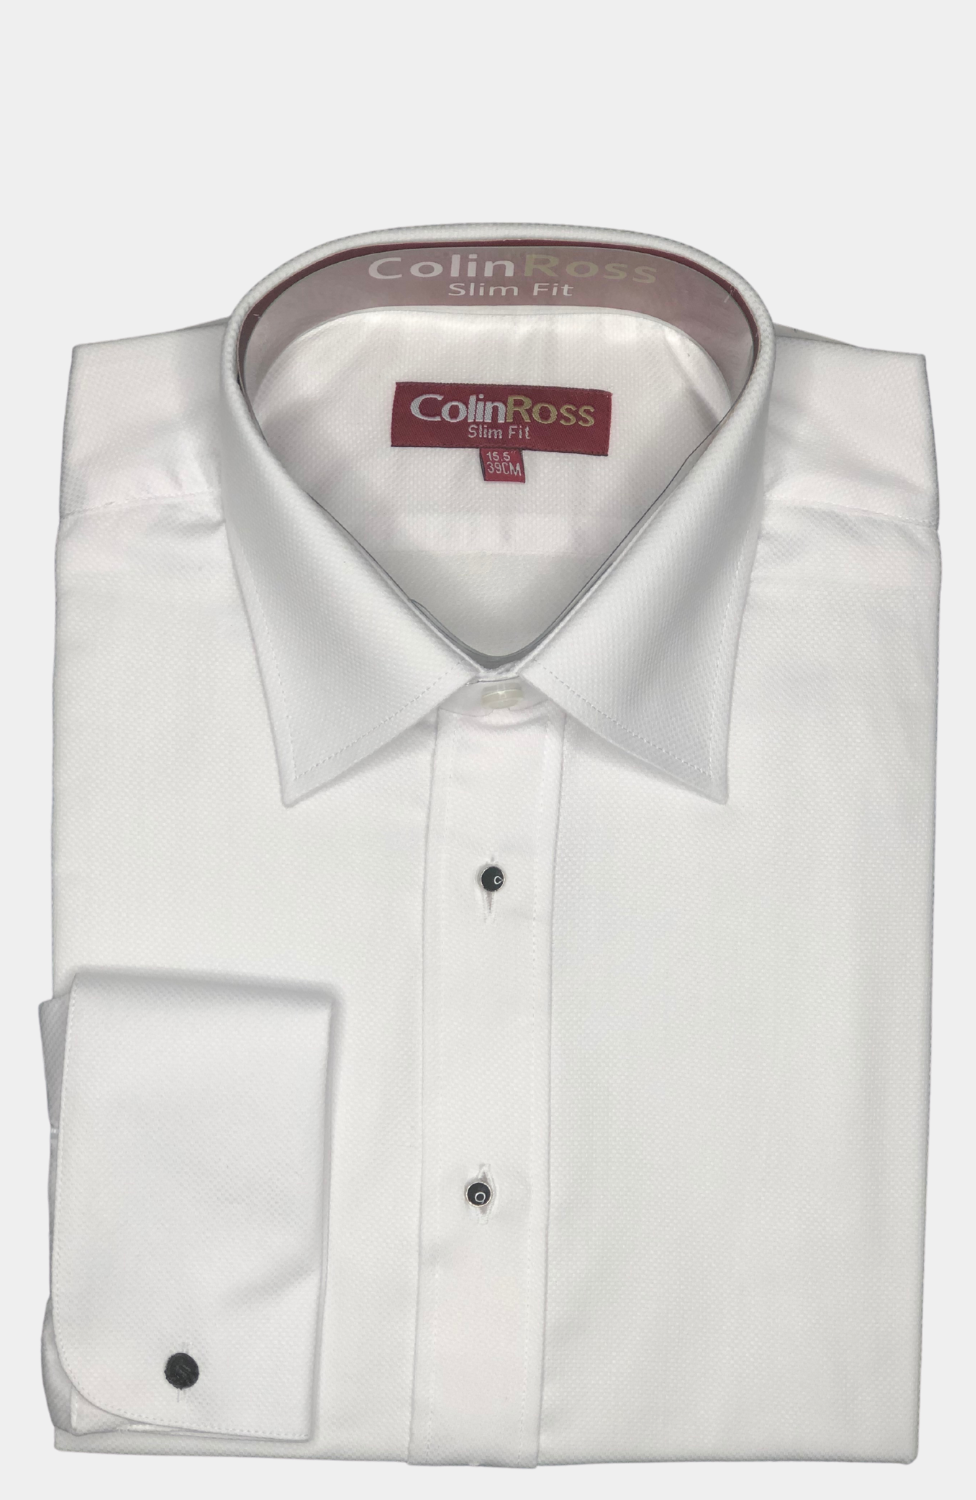 WHITE TAILORED FIT, STUD FRONT DRESS SHIRT